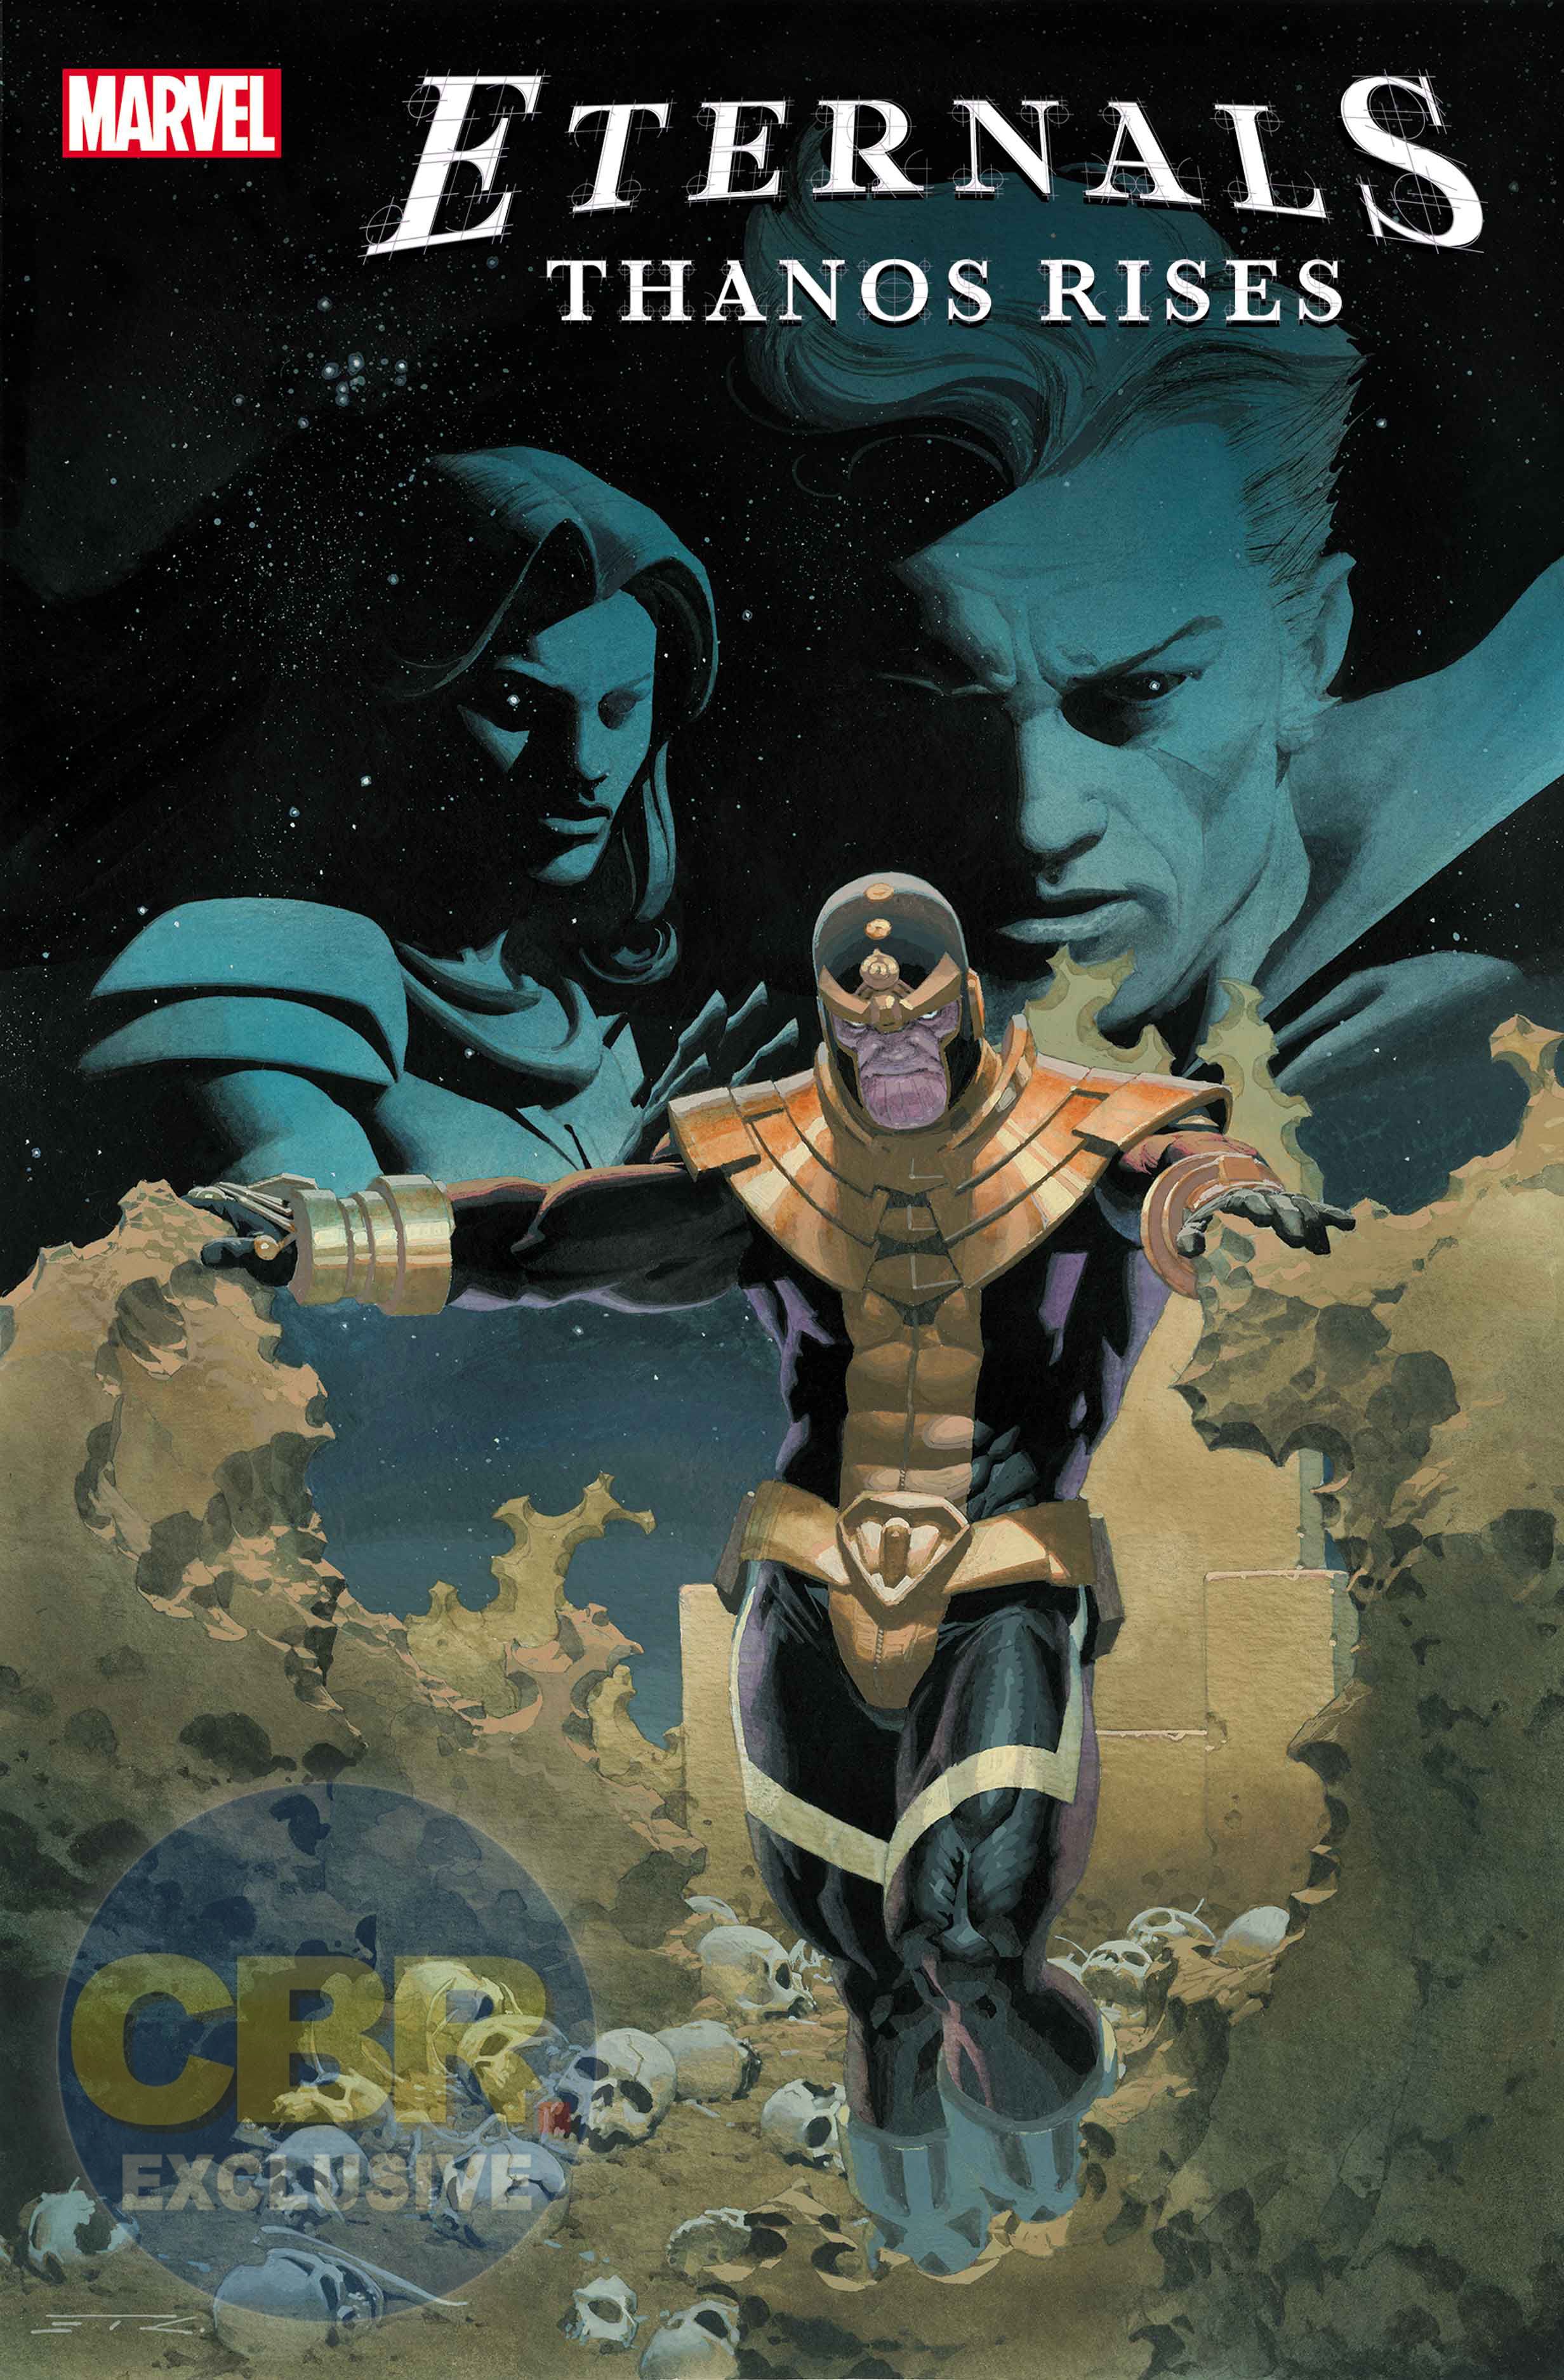 Cover to Dustin Weaver's Eternals: Thanos Rising one-shot